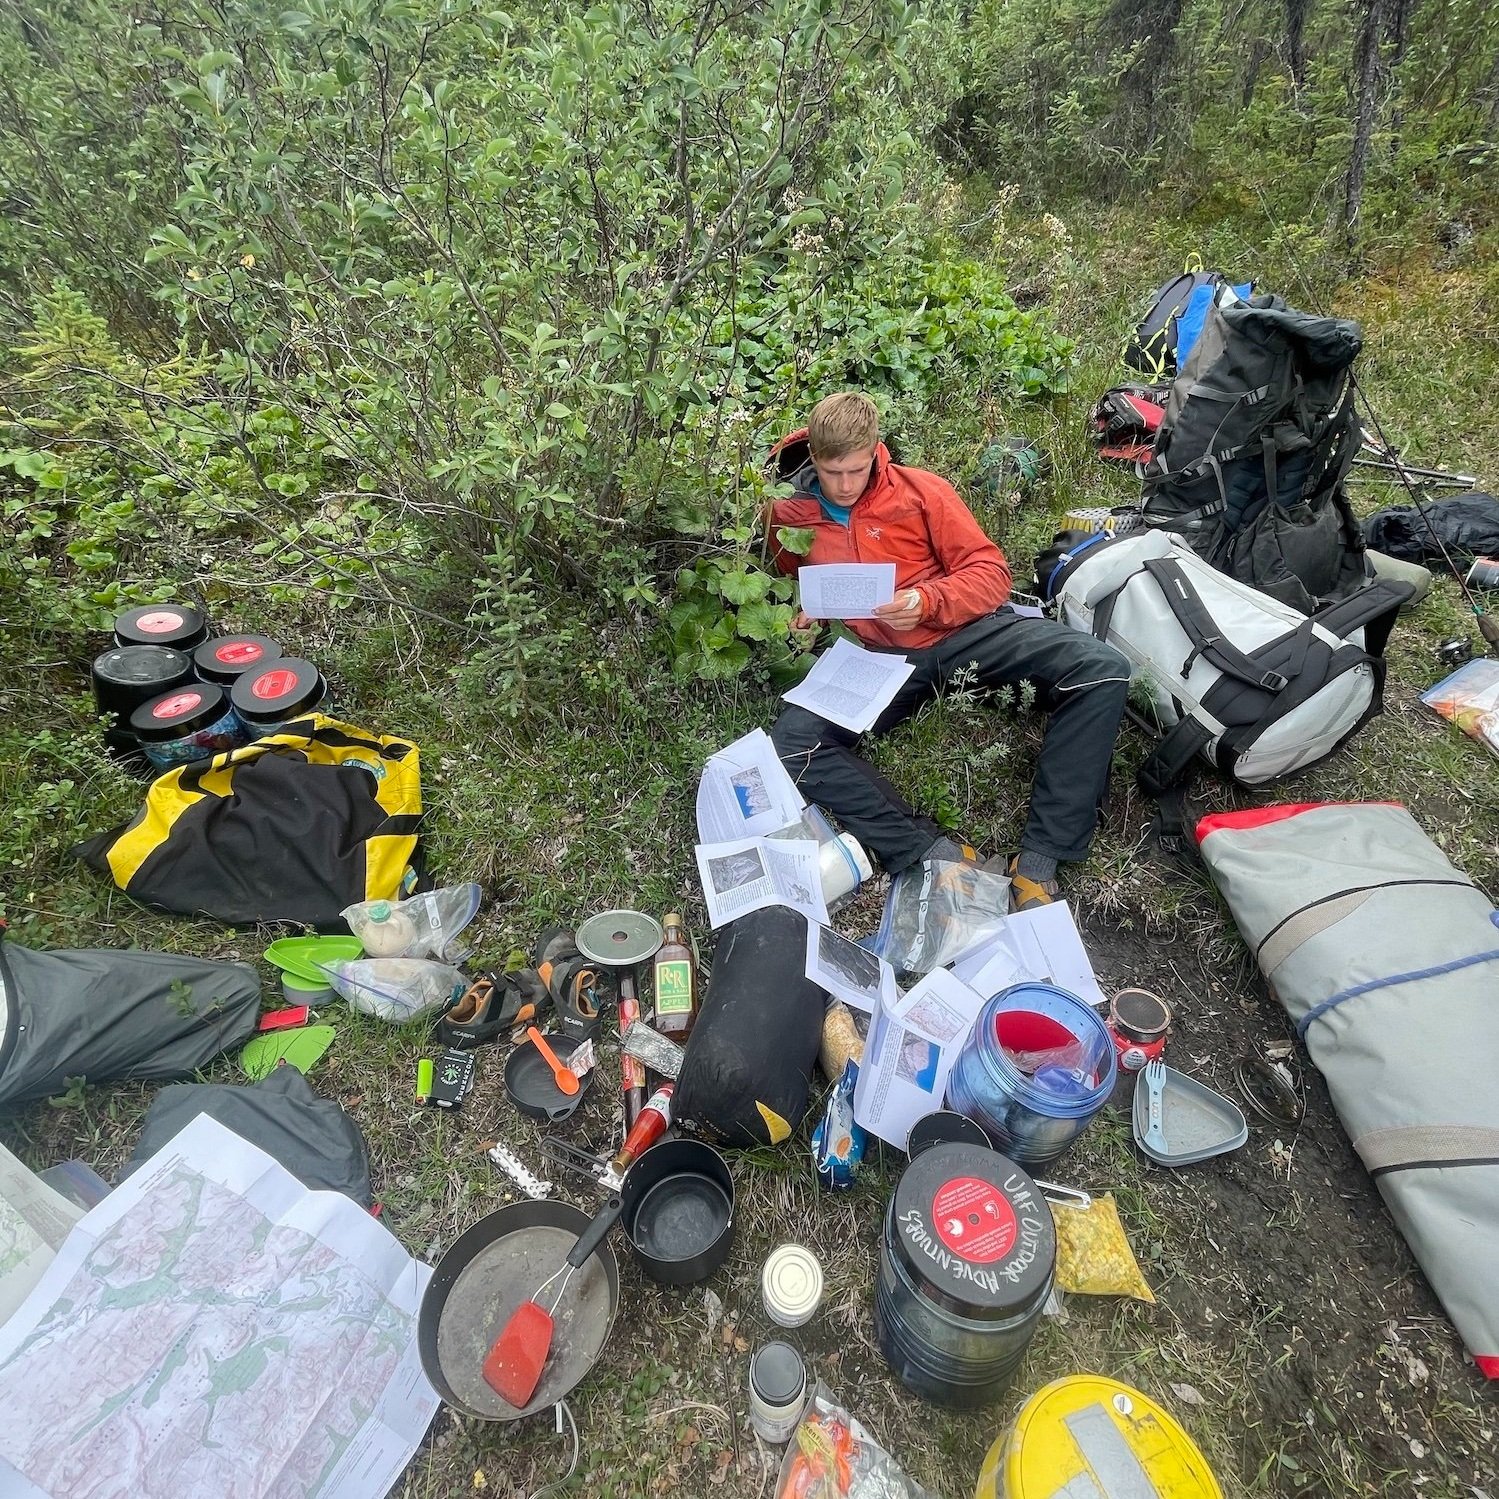  Studying the maps amid an explosion of gear at Circle Lake, gateway to the Arrigetch. 